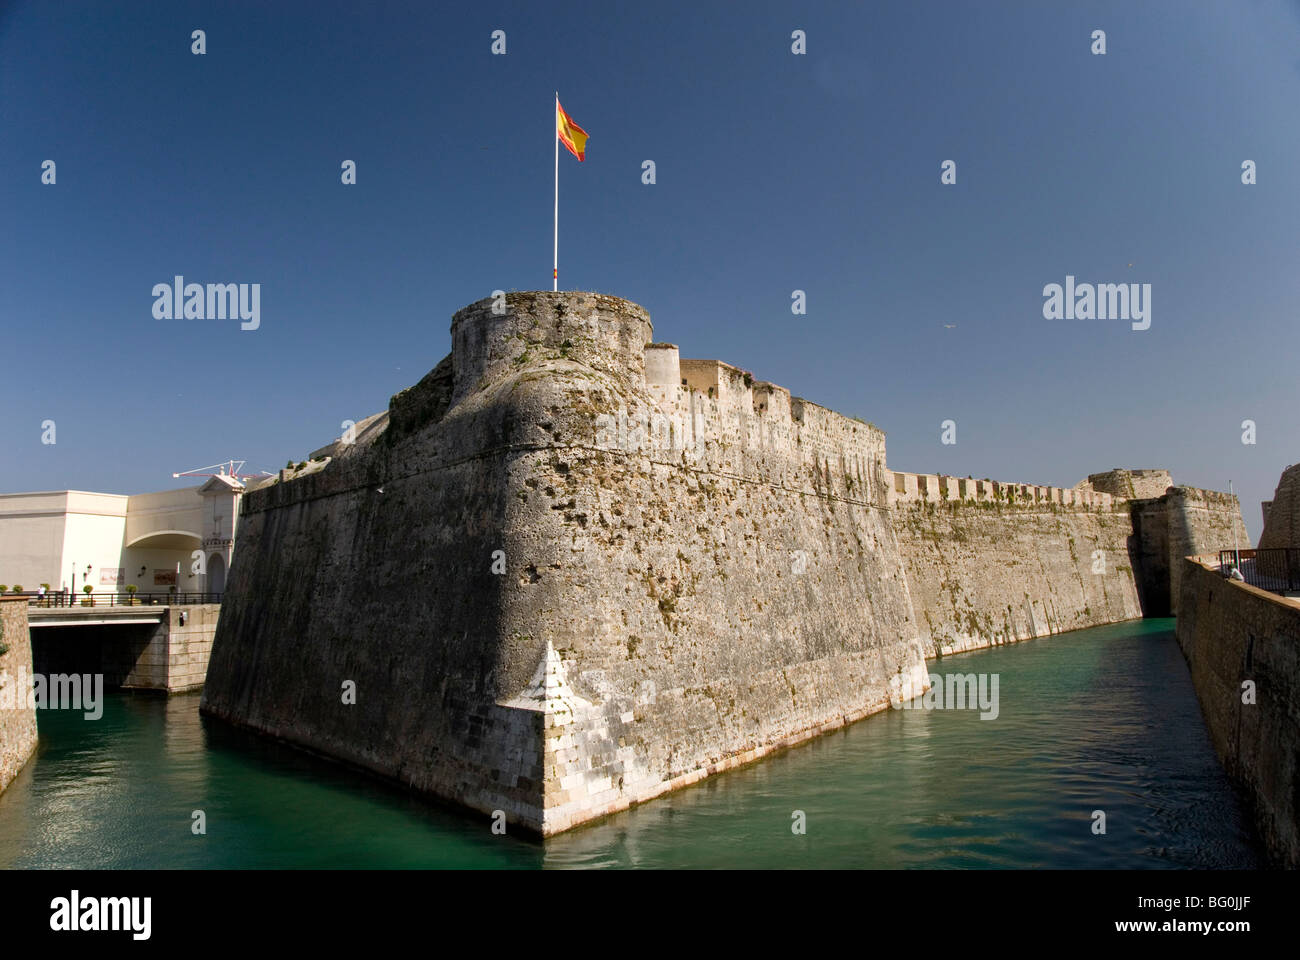 Defensive city wall and moat across narrow approach isthmus, Ceuta, the Spanish enclave on the coast of Morocco, North Africa Stock Photo